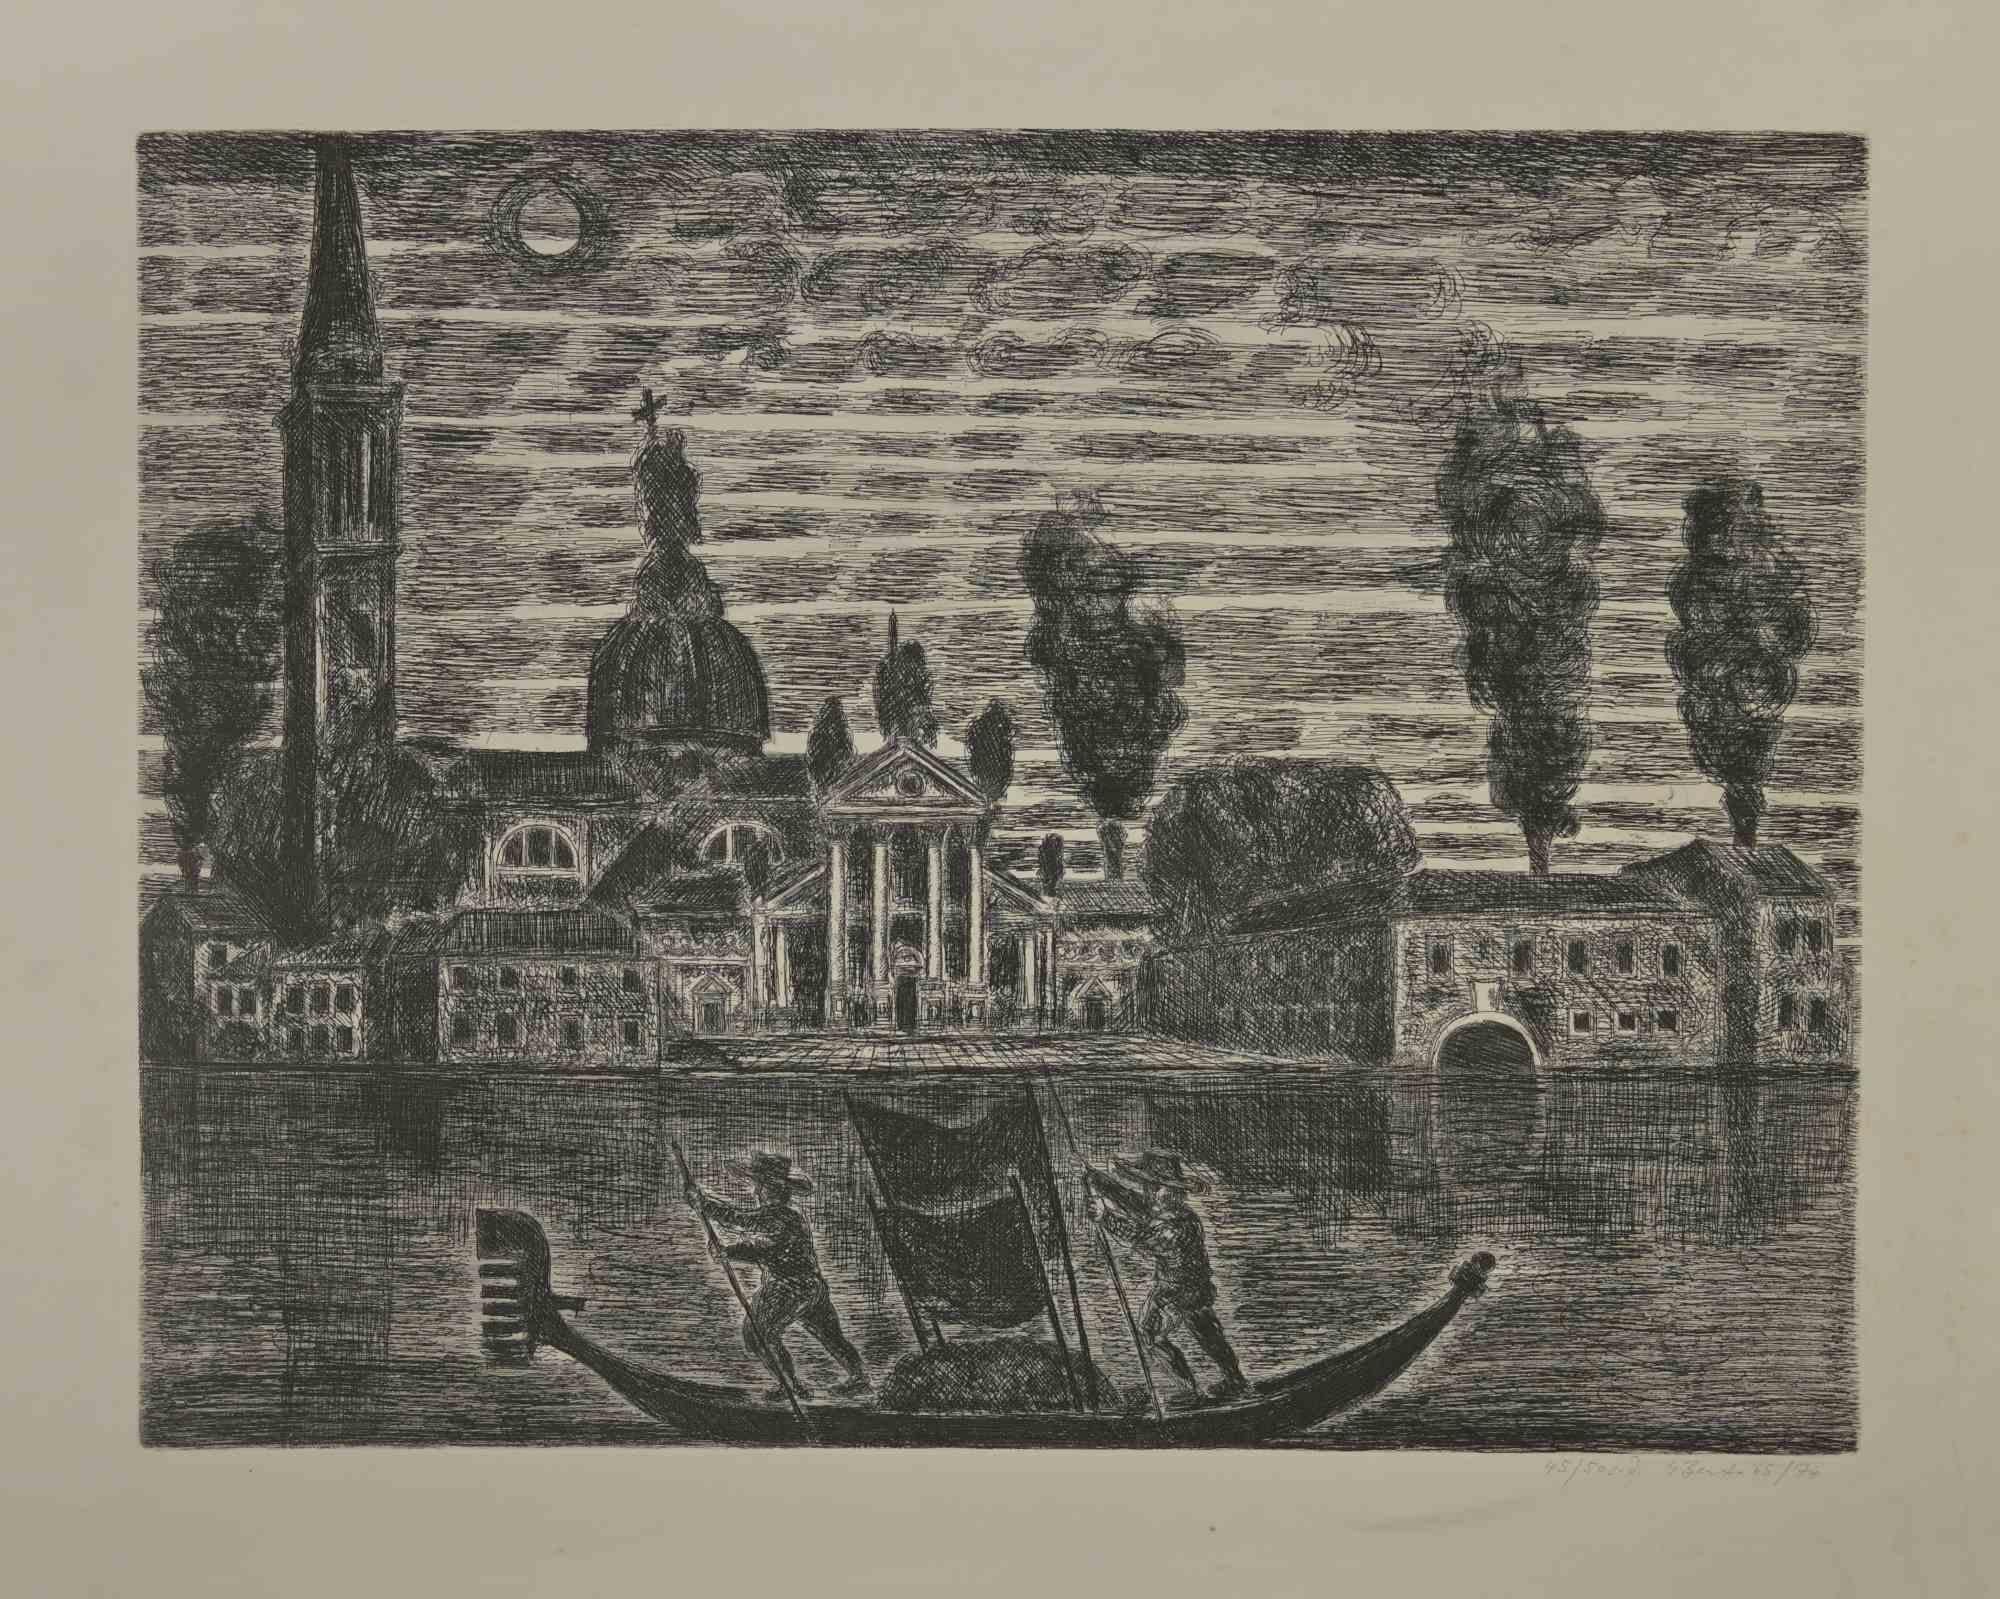 Gondoliers in Venice is an etching realized by Gianpaolo Berto in 1974.

60 X 75 cm , no frame.

Edition 45/50. Numbered and firmed by the artist in the lower margin.

Good conditions.

 
Gianpaolo Berto (1940) was born and raised in the